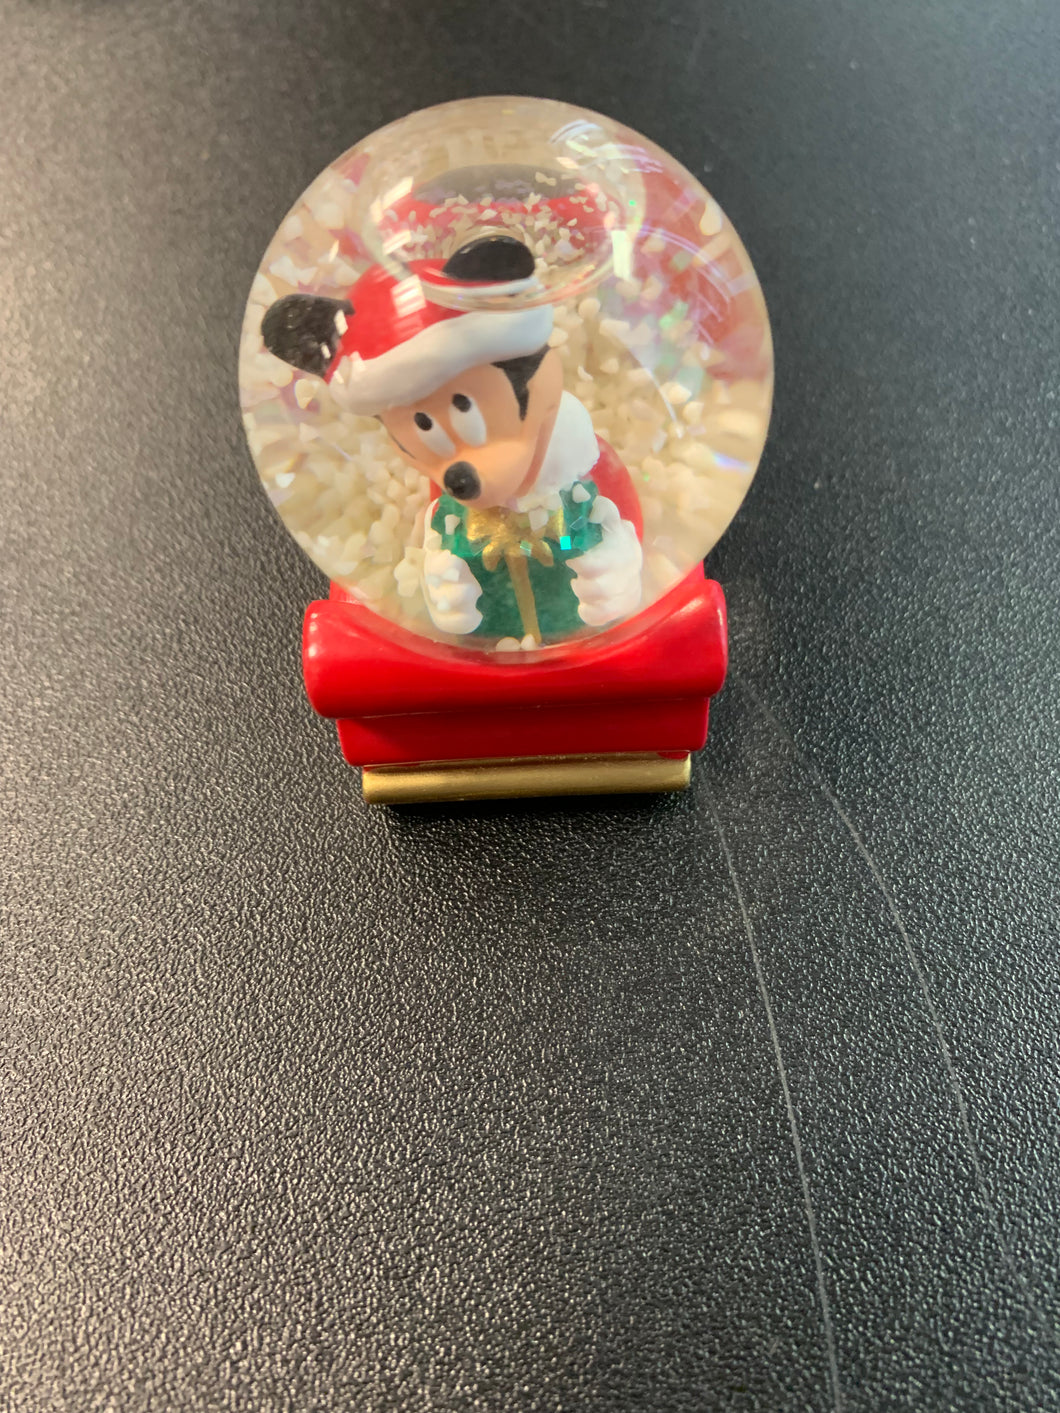 DISNEY 2003 MICKEY MOUSE IN CHRISTMAS SLIEGH JC PENNY EXCLUSIVE MINI SNOWGLOBE